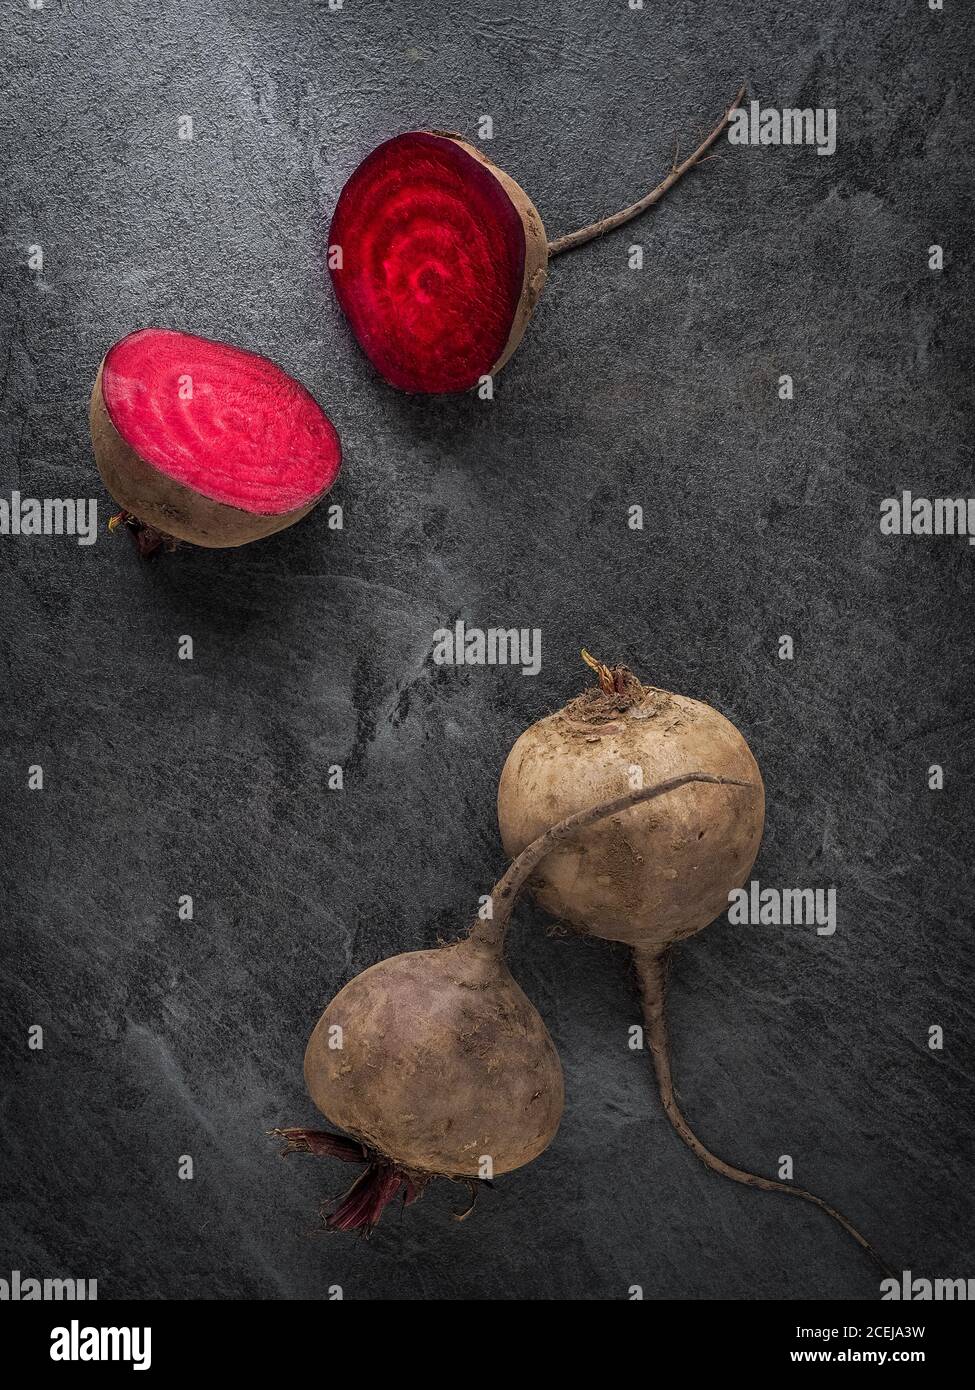 Beetroot cut in half on dark table. Overhead shot with copy space. Dark food photo. Stock Photo